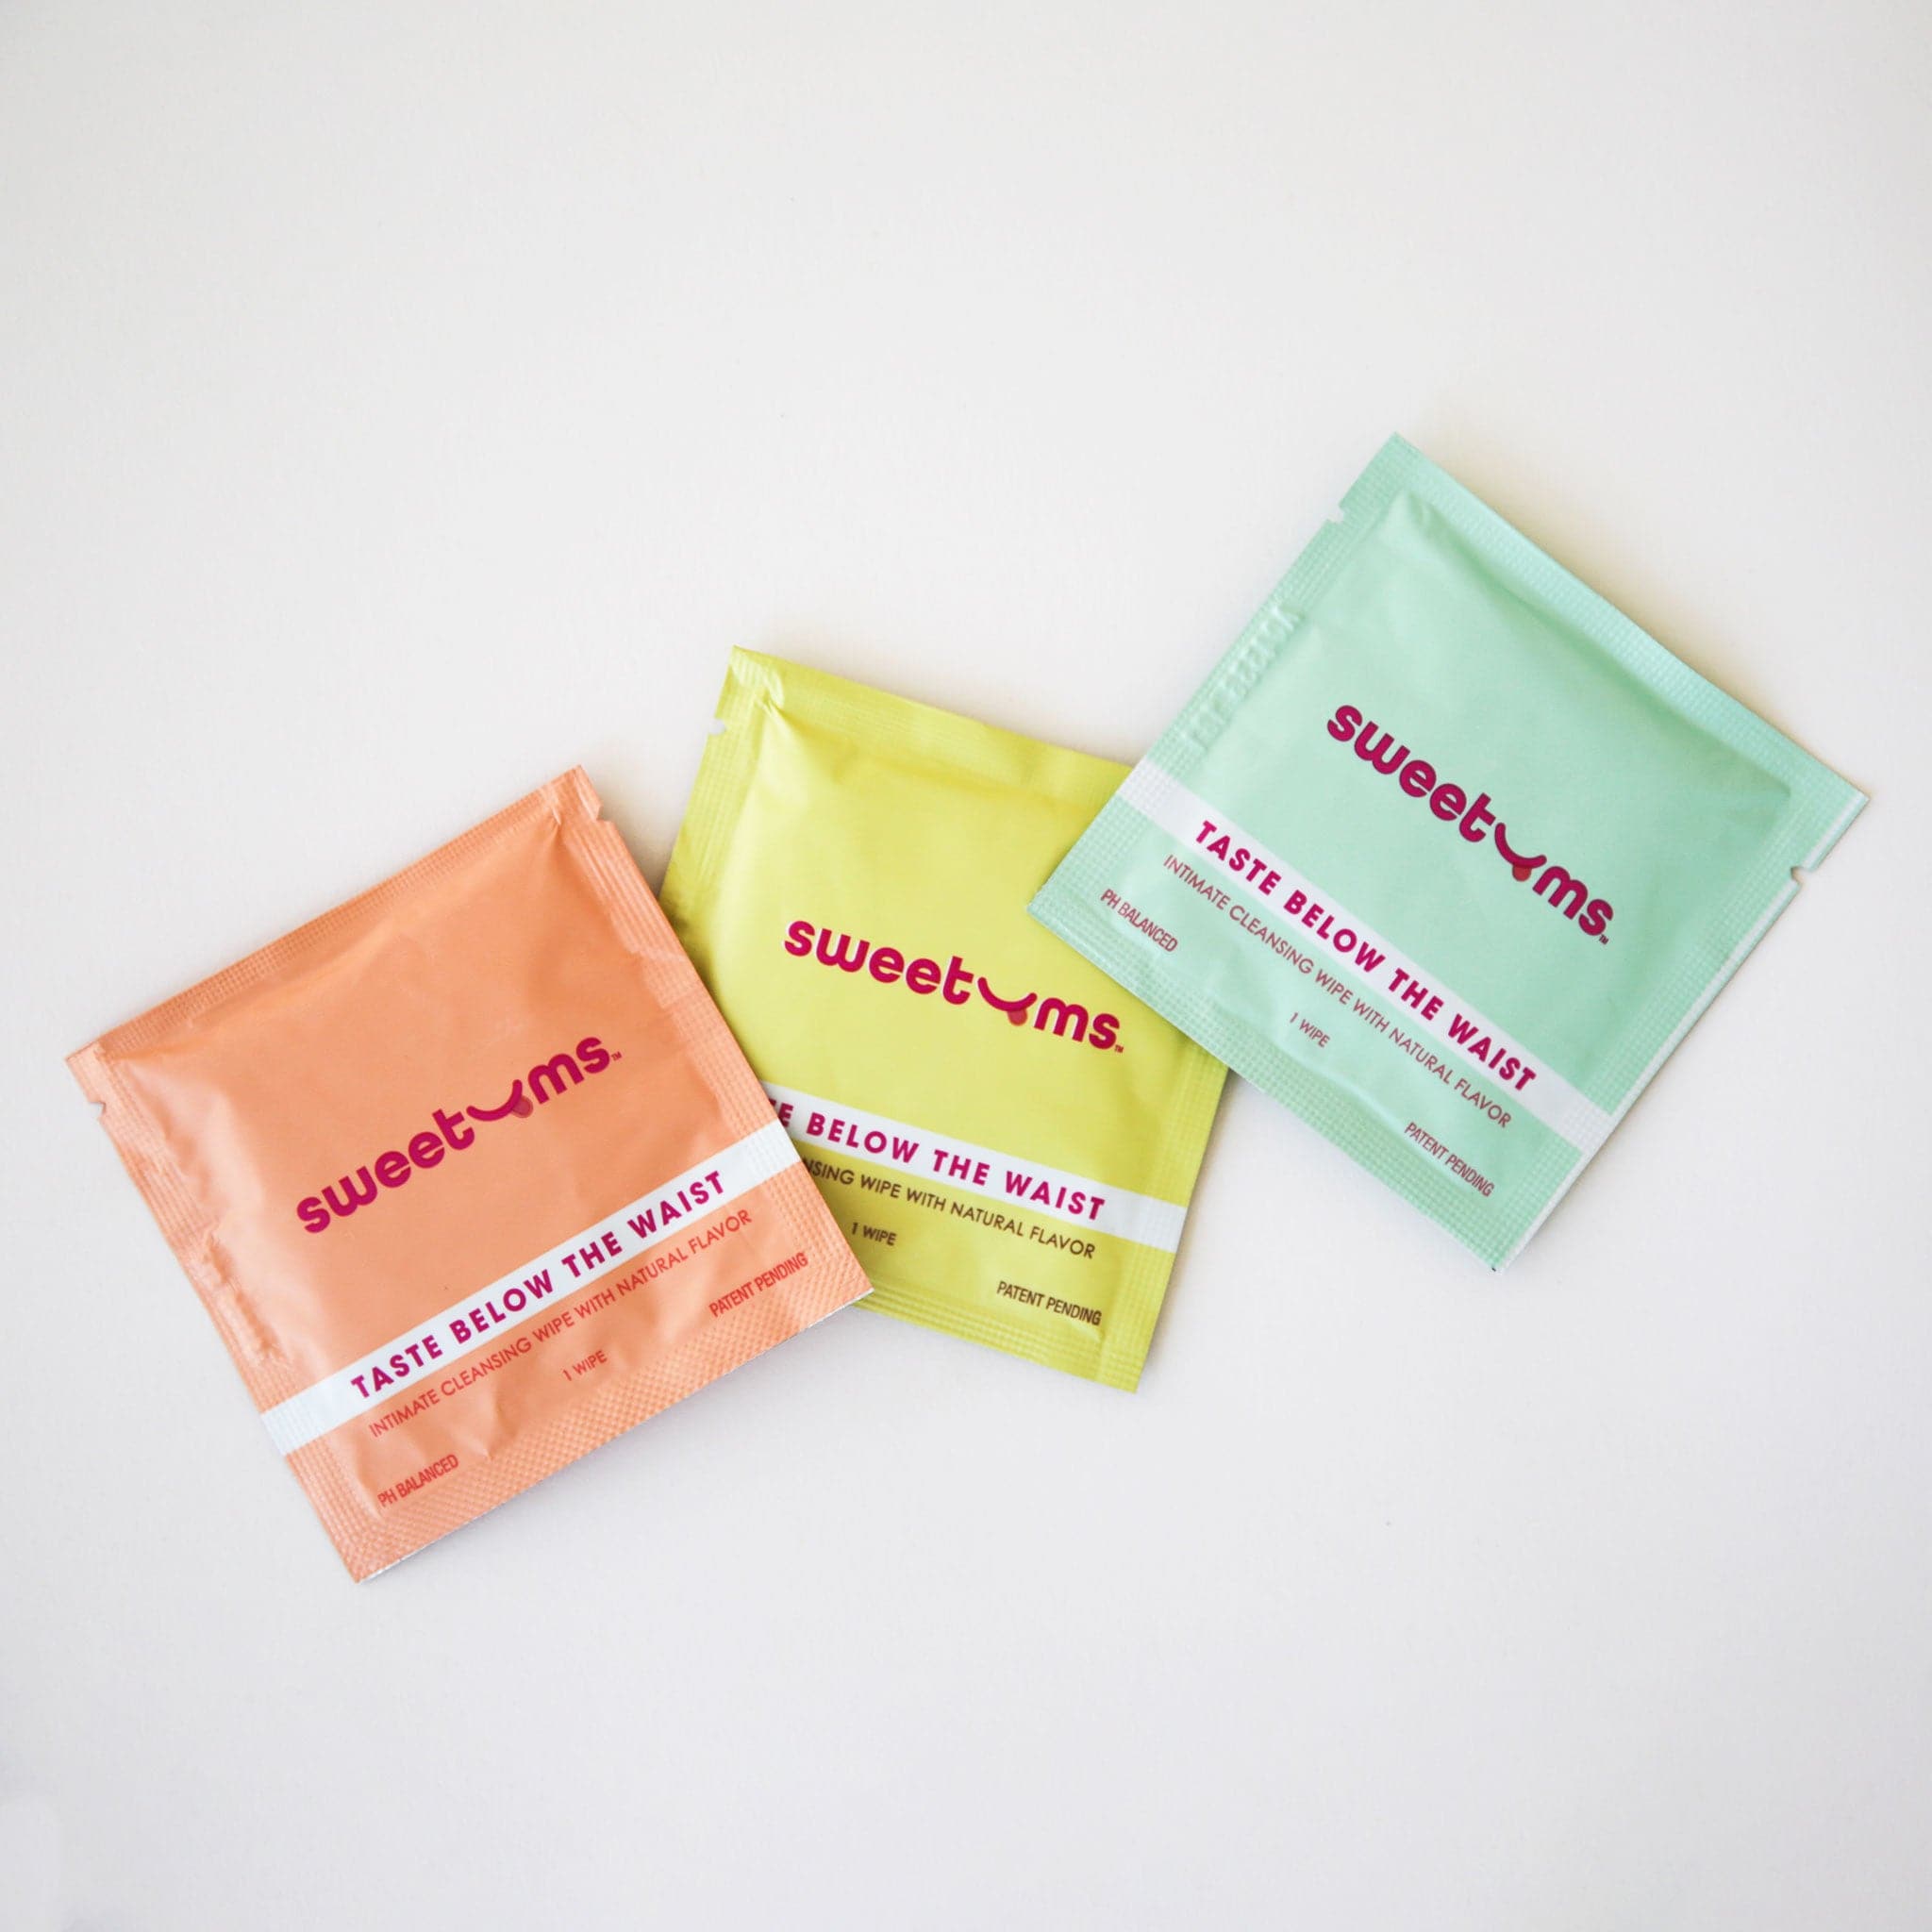 Individual packets of intimate cleaning wipes. Each scent has a different color packaging, and this watermelon flavor is light blue.